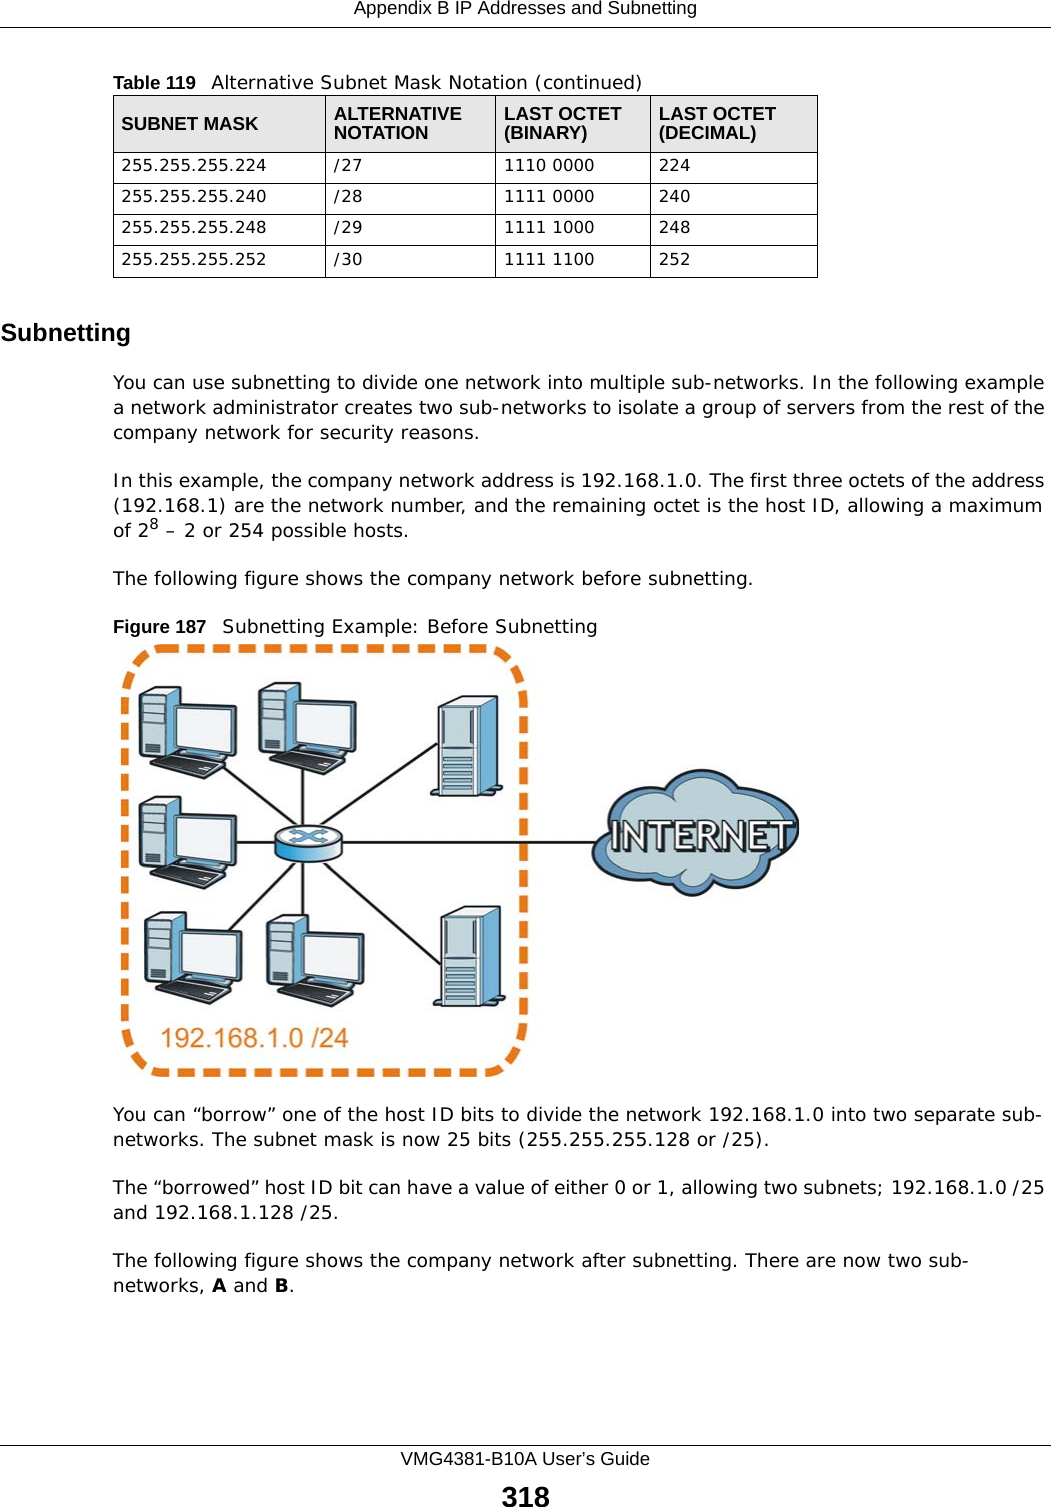 Appendix B IP Addresses and SubnettingVMG4381-B10A User’s Guide318SubnettingYou can use subnetting to divide one network into multiple sub-networks. In the following example a network administrator creates two sub-networks to isolate a group of servers from the rest of the company network for security reasons.In this example, the company network address is 192.168.1.0. The first three octets of the address (192.168.1) are the network number, and the remaining octet is the host ID, allowing a maximum of 28 – 2 or 254 possible hosts.The following figure shows the company network before subnetting.  Figure 187   Subnetting Example: Before SubnettingYou can “borrow” one of the host ID bits to divide the network 192.168.1.0 into two separate sub-networks. The subnet mask is now 25 bits (255.255.255.128 or /25).The “borrowed” host ID bit can have a value of either 0 or 1, allowing two subnets; 192.168.1.0 /25 and 192.168.1.128 /25. The following figure shows the company network after subnetting. There are now two sub-networks, A and B. 255.255.255.224 /27 1110 0000 224255.255.255.240 /28 1111 0000 240255.255.255.248 /29 1111 1000 248255.255.255.252 /30 1111 1100 252Table 119   Alternative Subnet Mask Notation (continued)SUBNET MASK ALTERNATIVE NOTATION LAST OCTET (BINARY) LAST OCTET (DECIMAL)